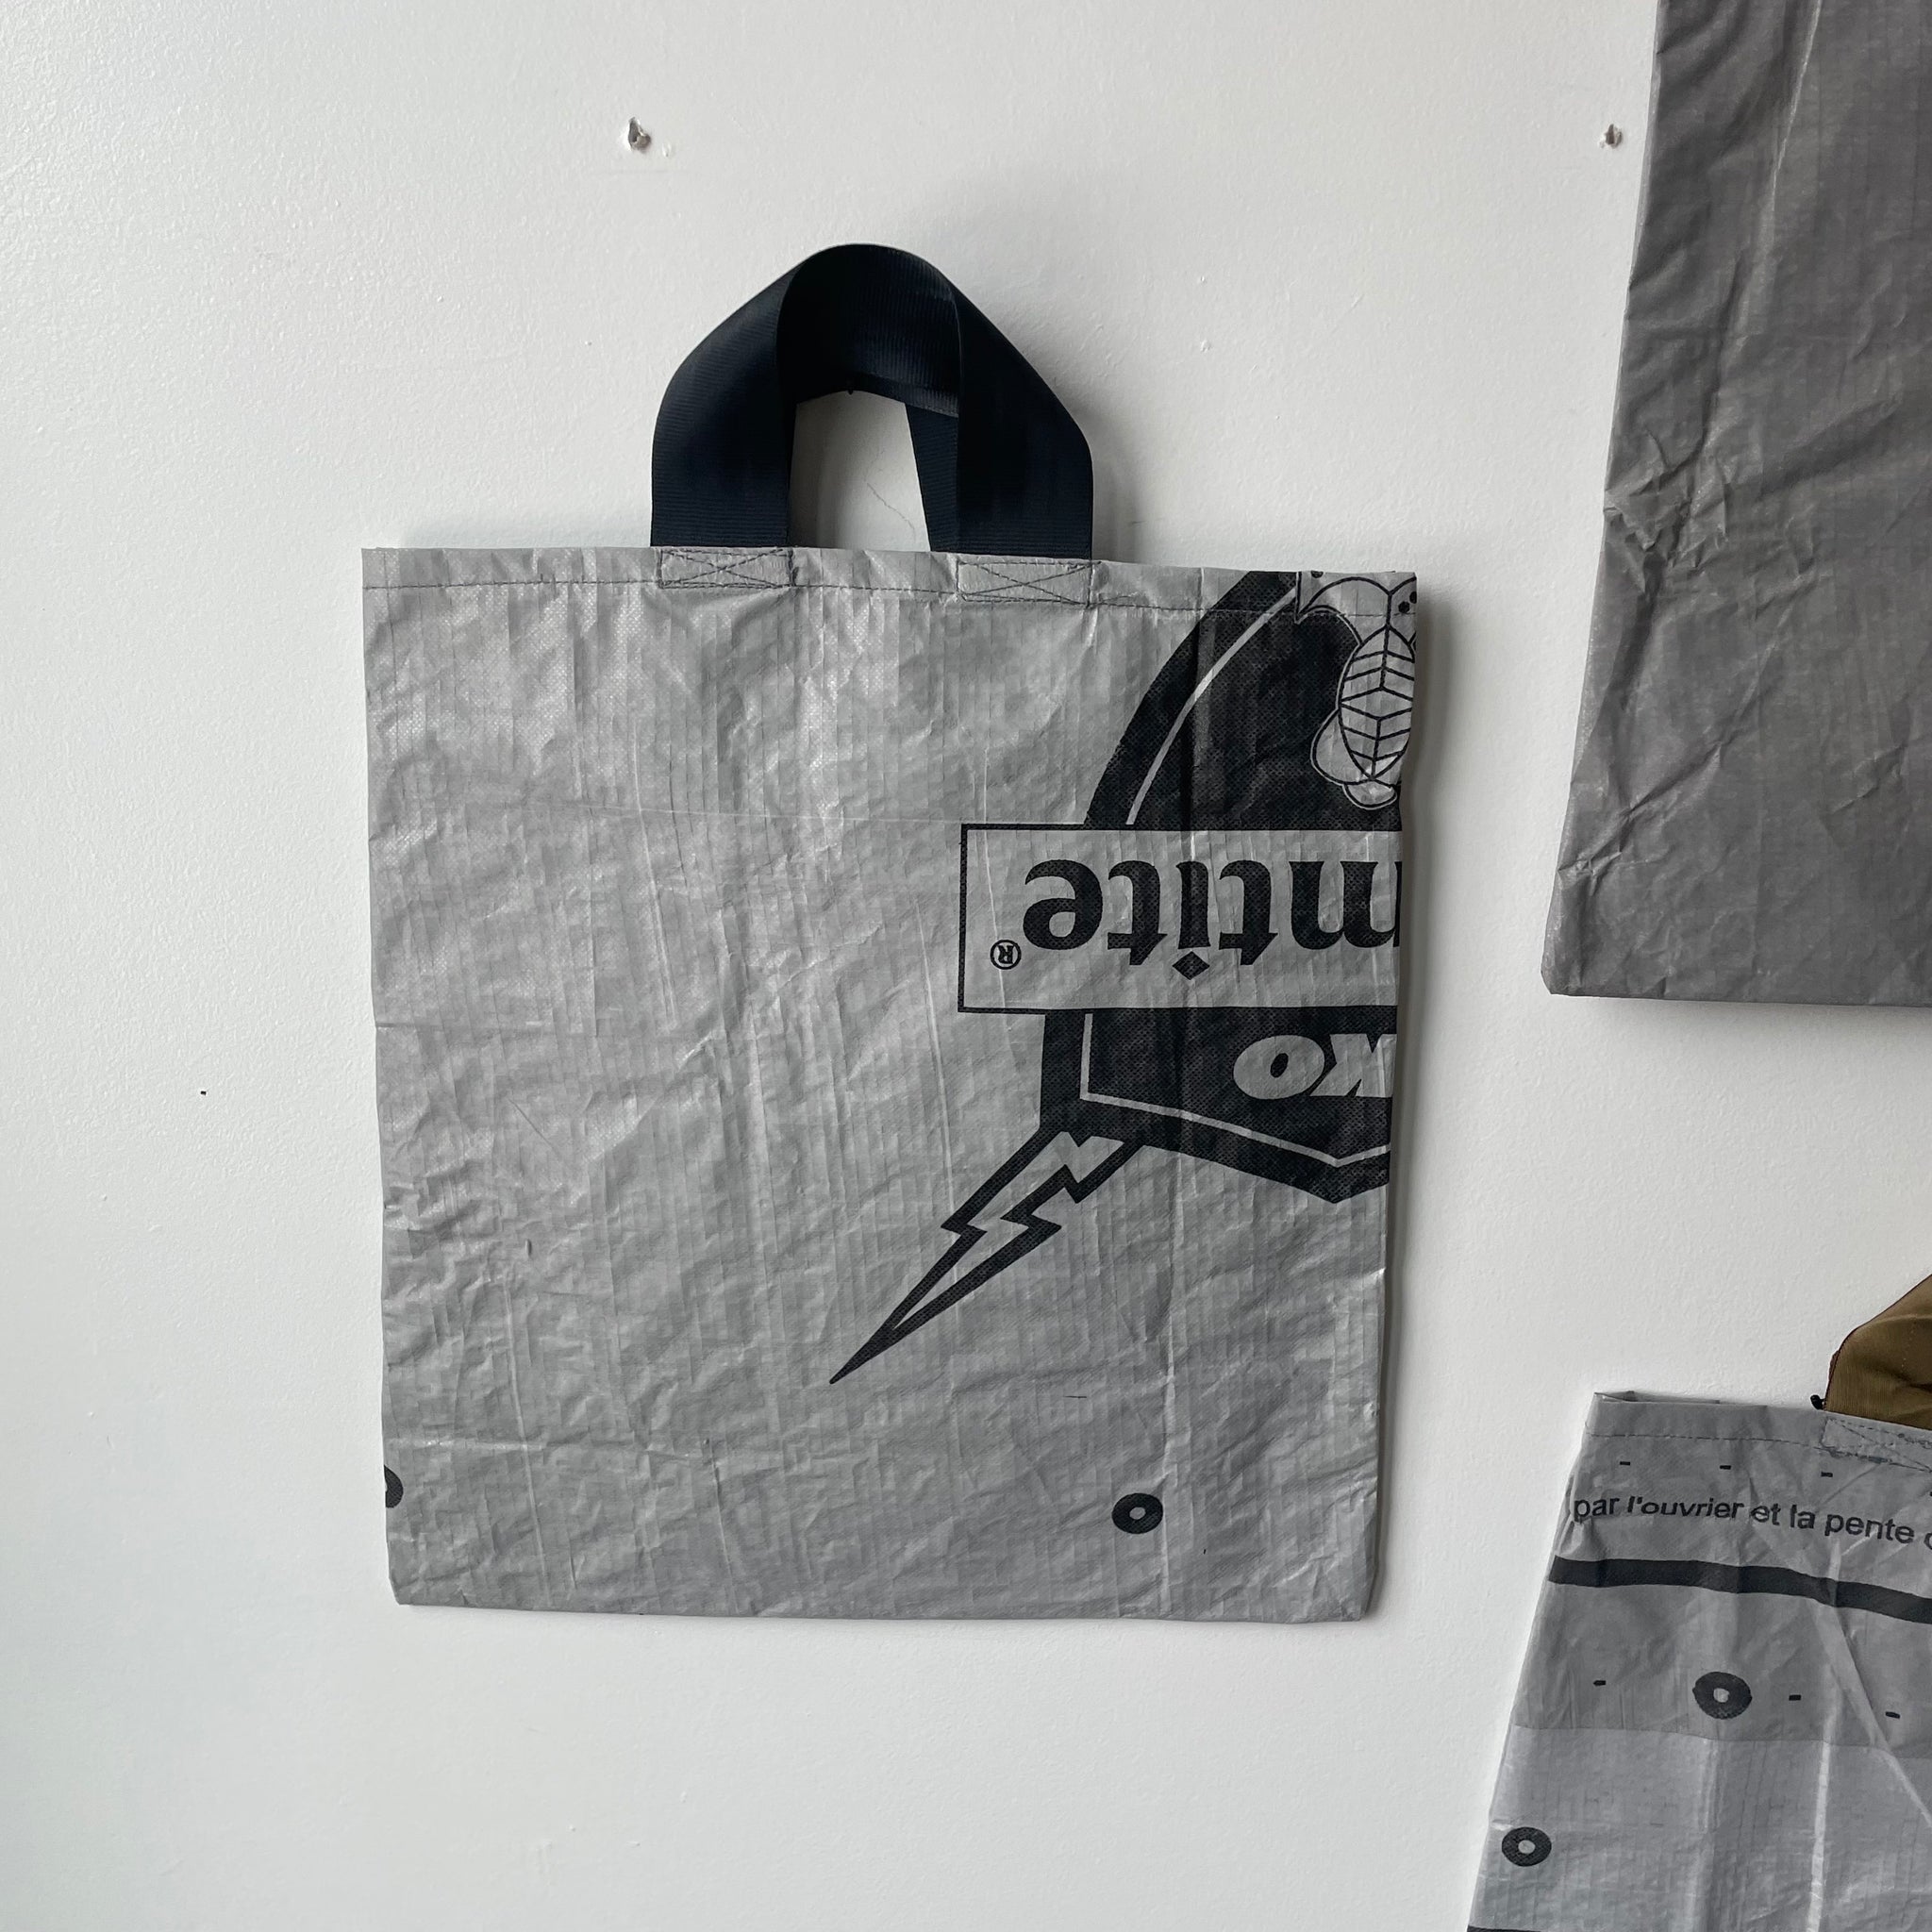 OFF-WHITE Arrows Tote Bag Black White in Polyethylene with Silver